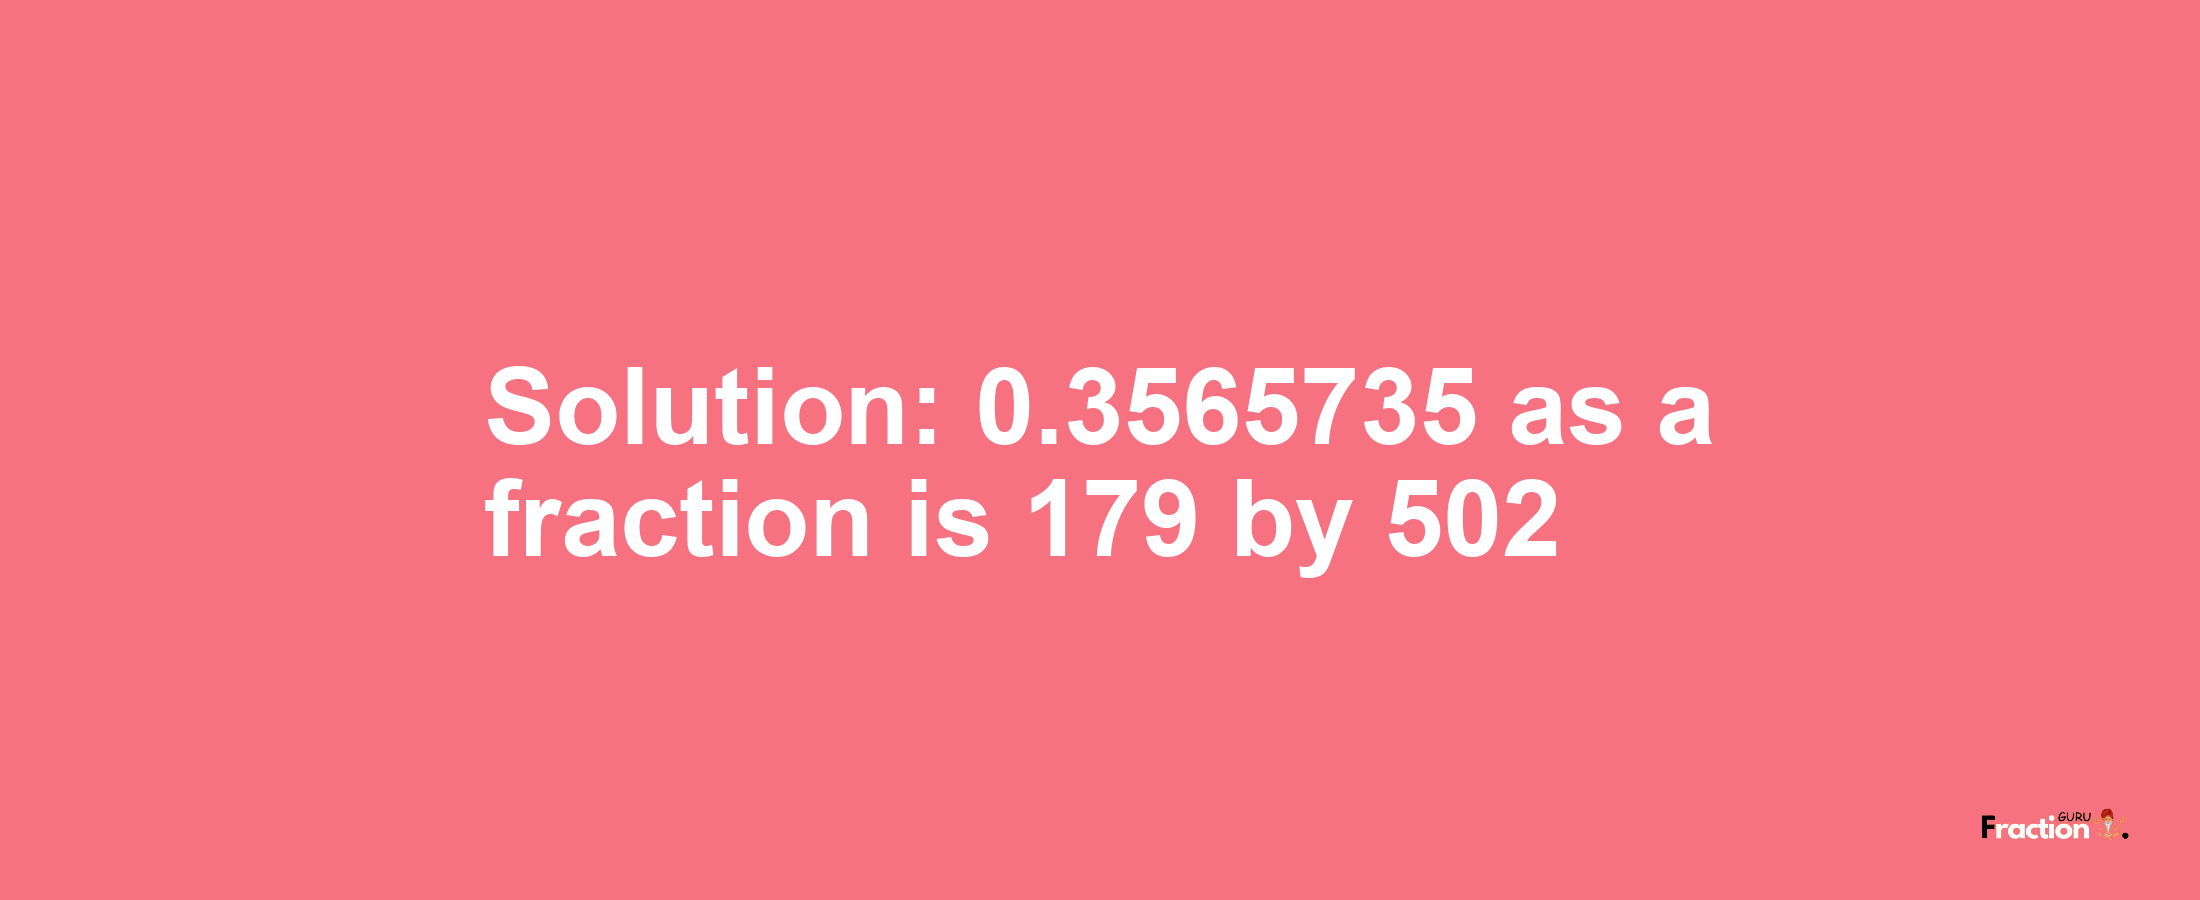 Solution:0.3565735 as a fraction is 179/502